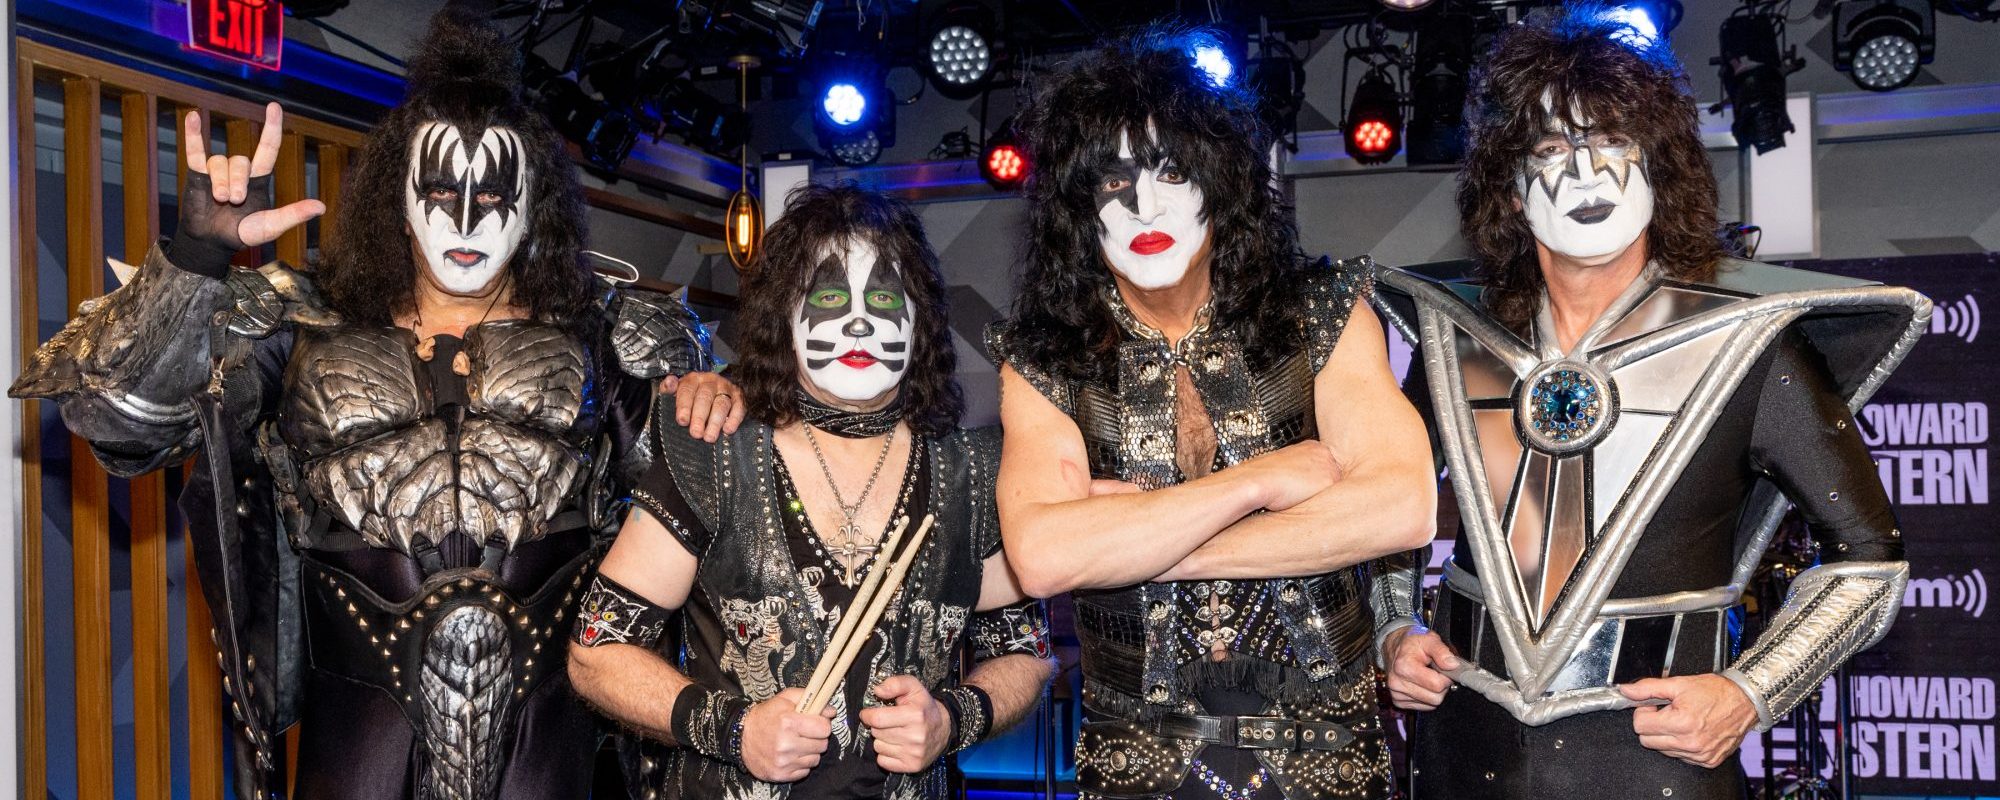 KISS Celebrating Final Concerts with Series of NYC Takeover Events & Promotions